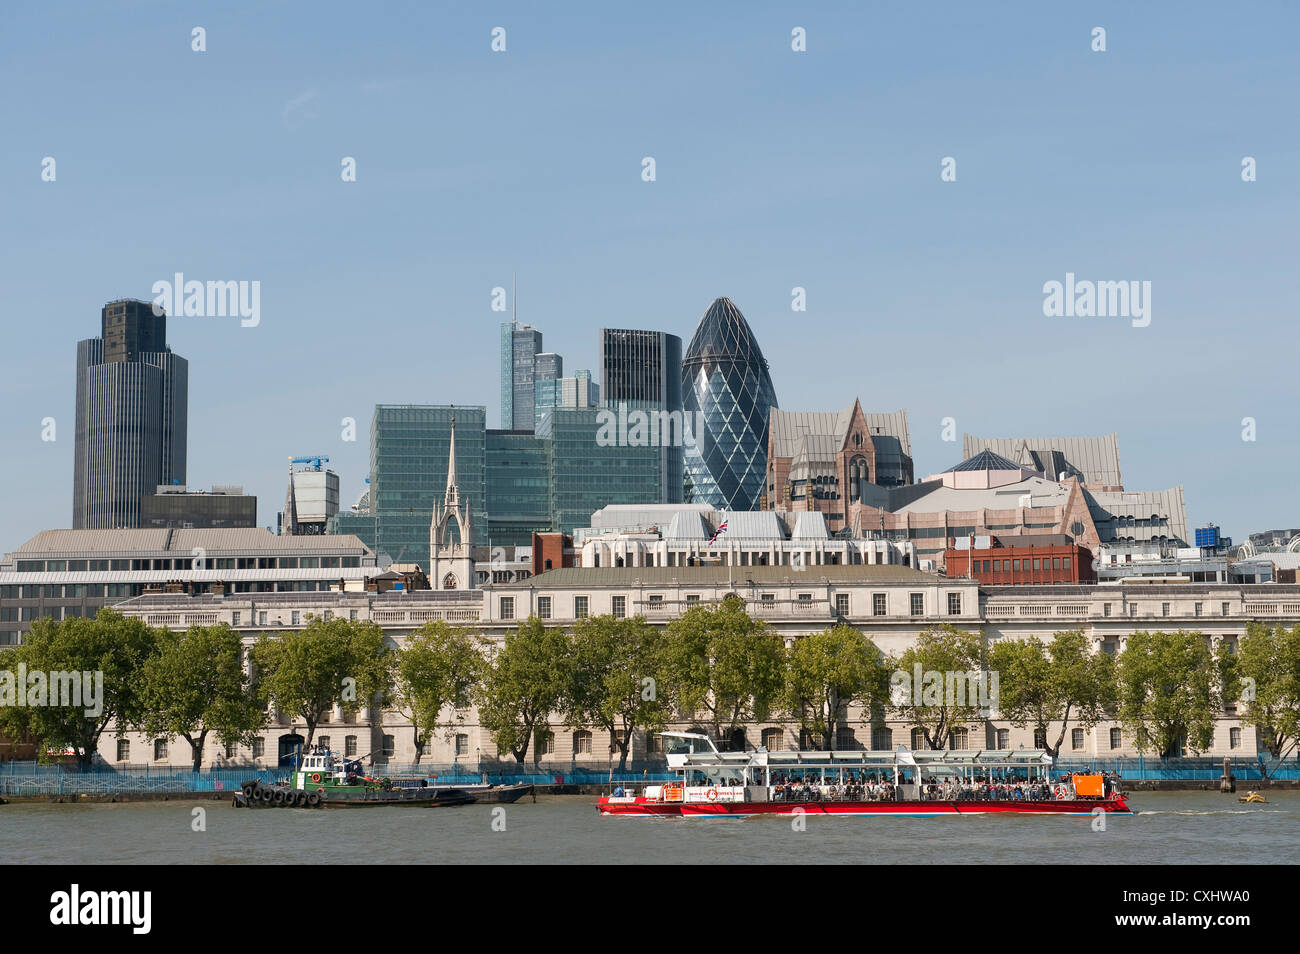 Beautiful view of boats on the River Thames with tall buildings of the ...